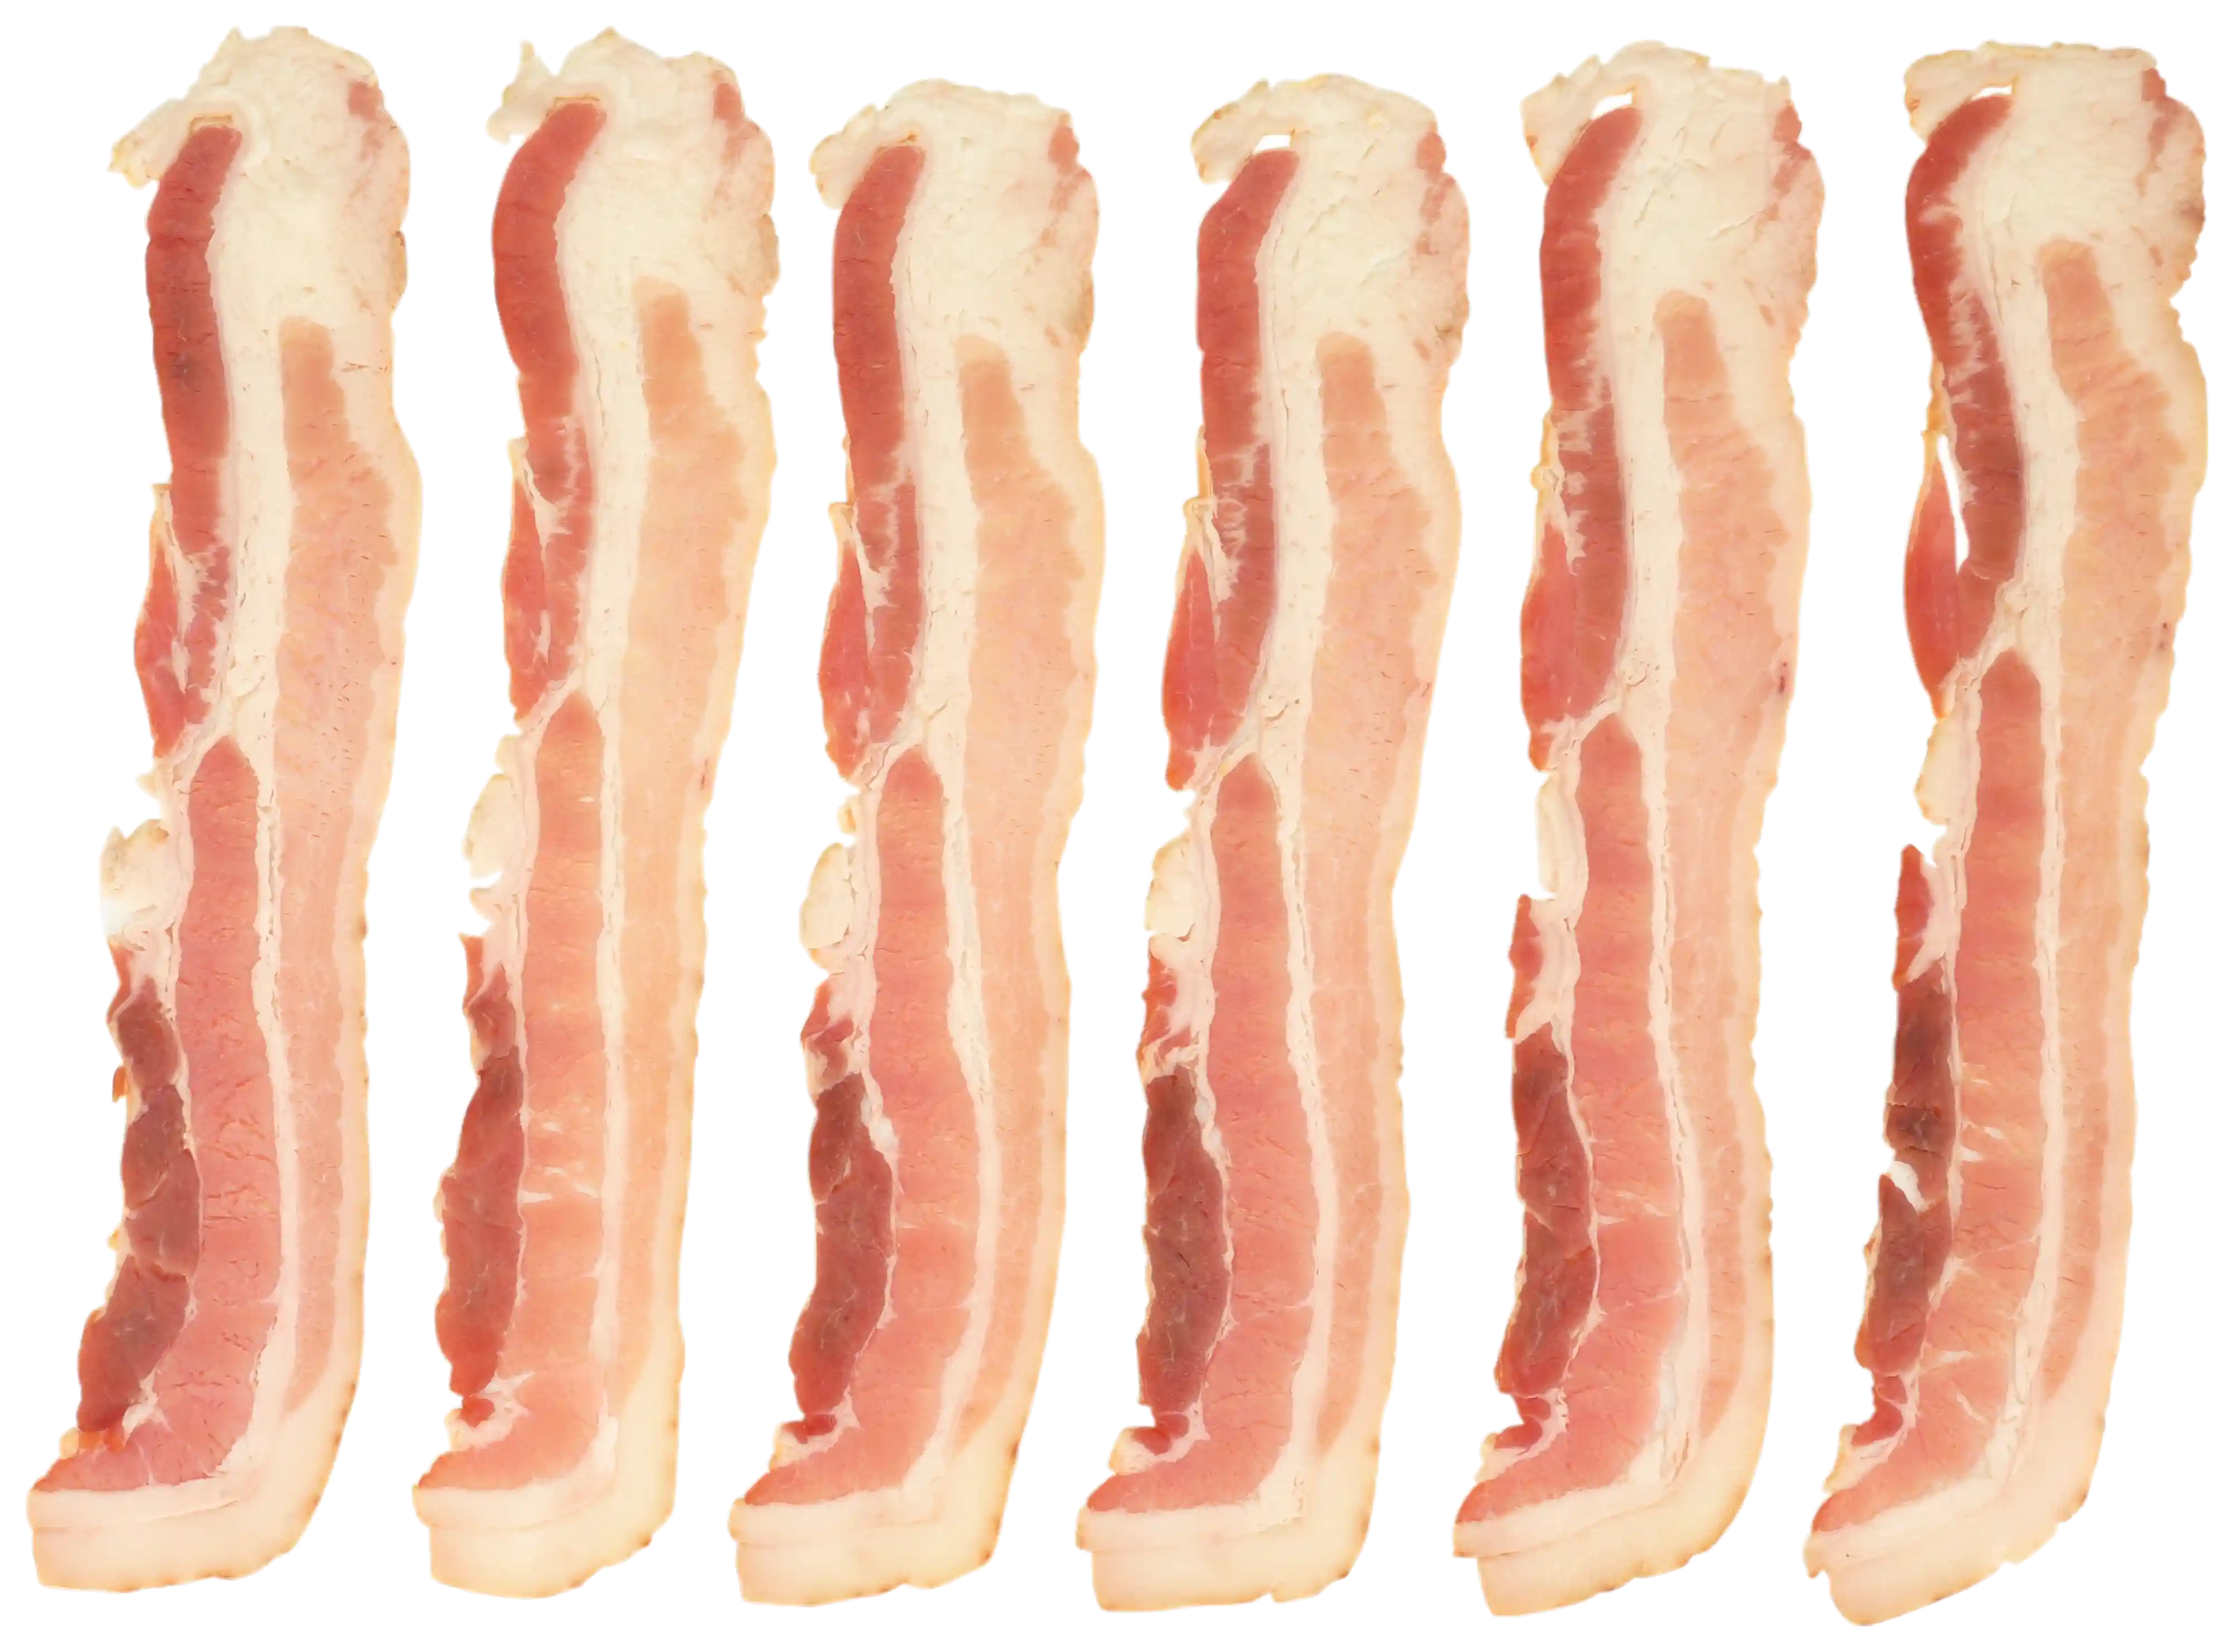 Wright® Brand Naturally Applewood Smoked Thin Sliced Bacon, Flat-Pack®, 15 Lbs, 18-22 Slices per Pound, Gas Flushed_image_11